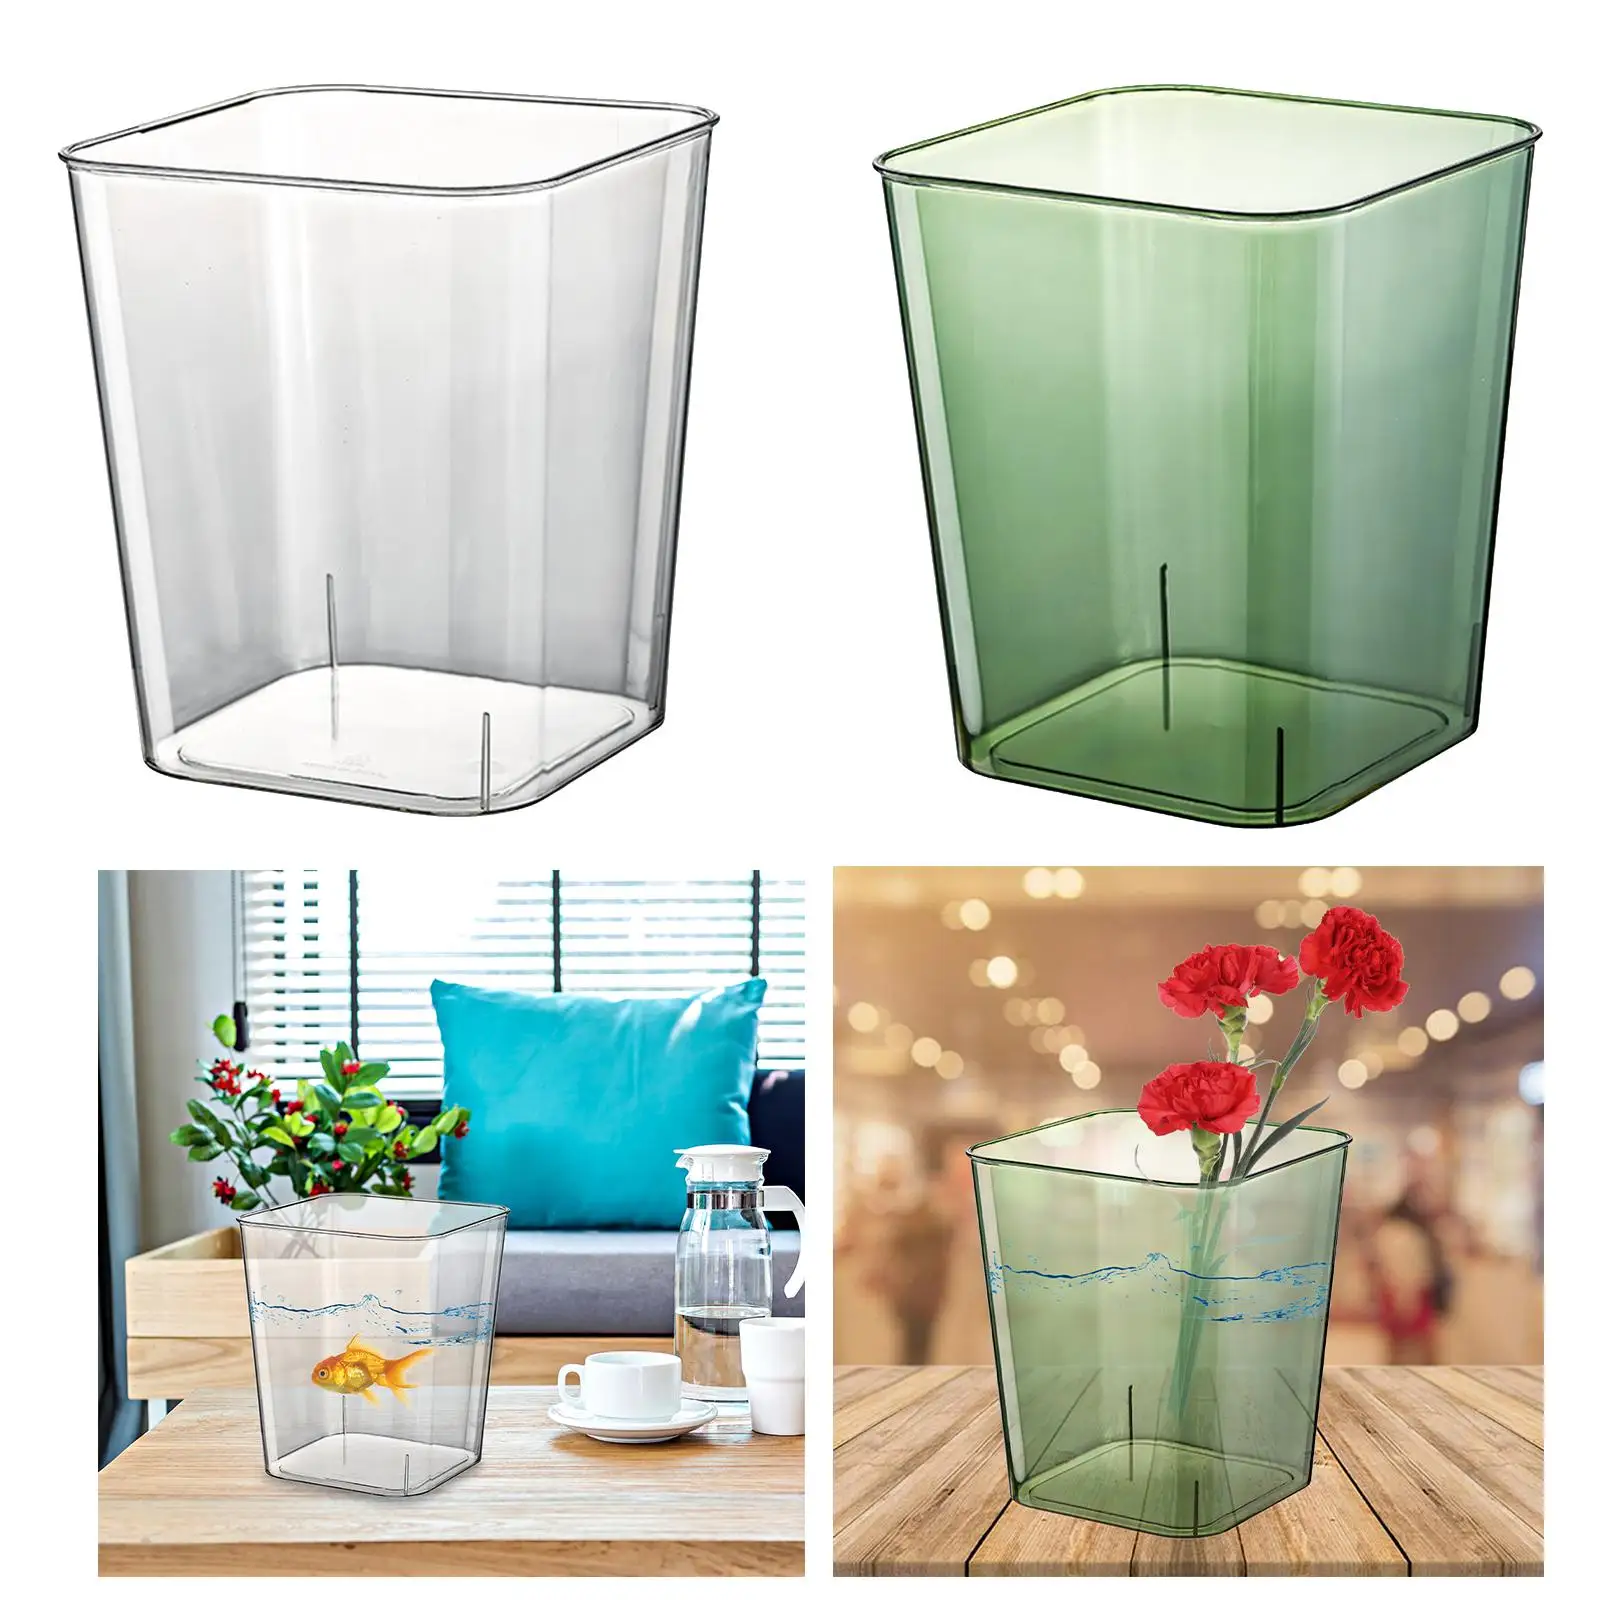 Multipurpose Trash Can Storage Box Large Capacity Decorative Visible Wastebasket Waste Container for Kitchen Car Bathroom Indoor